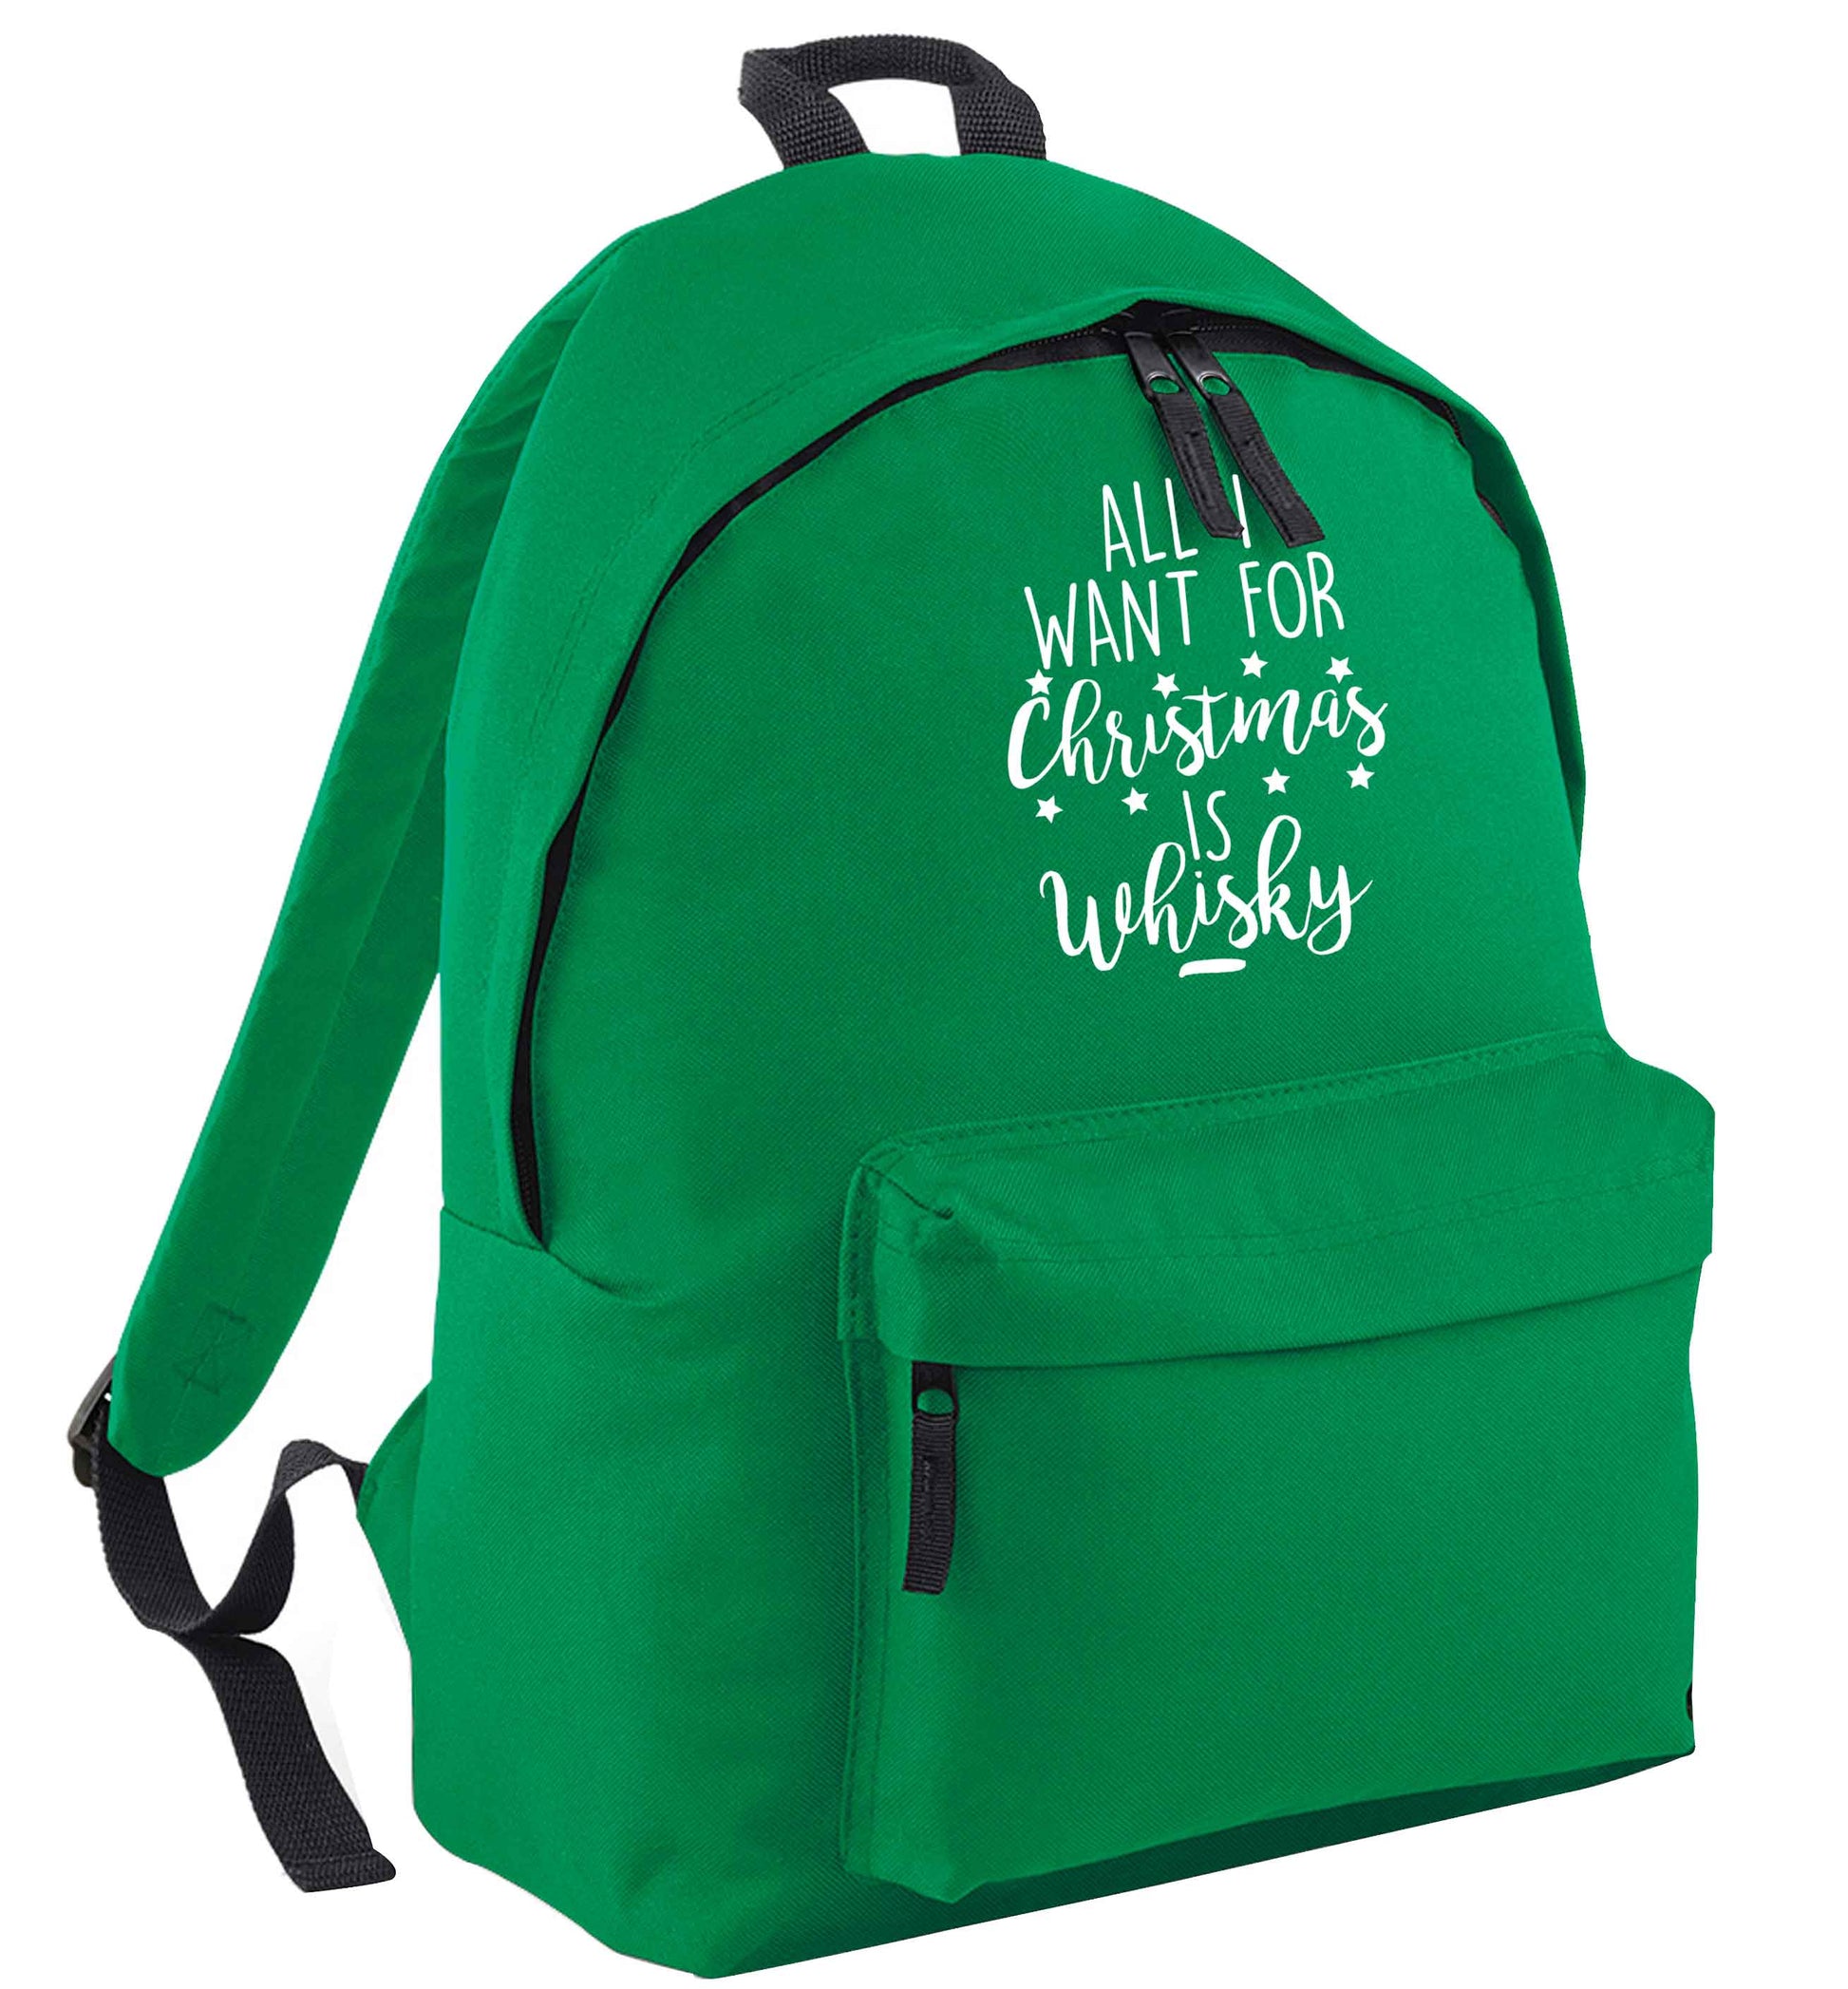 All I want for Christmas is whisky green adults backpack